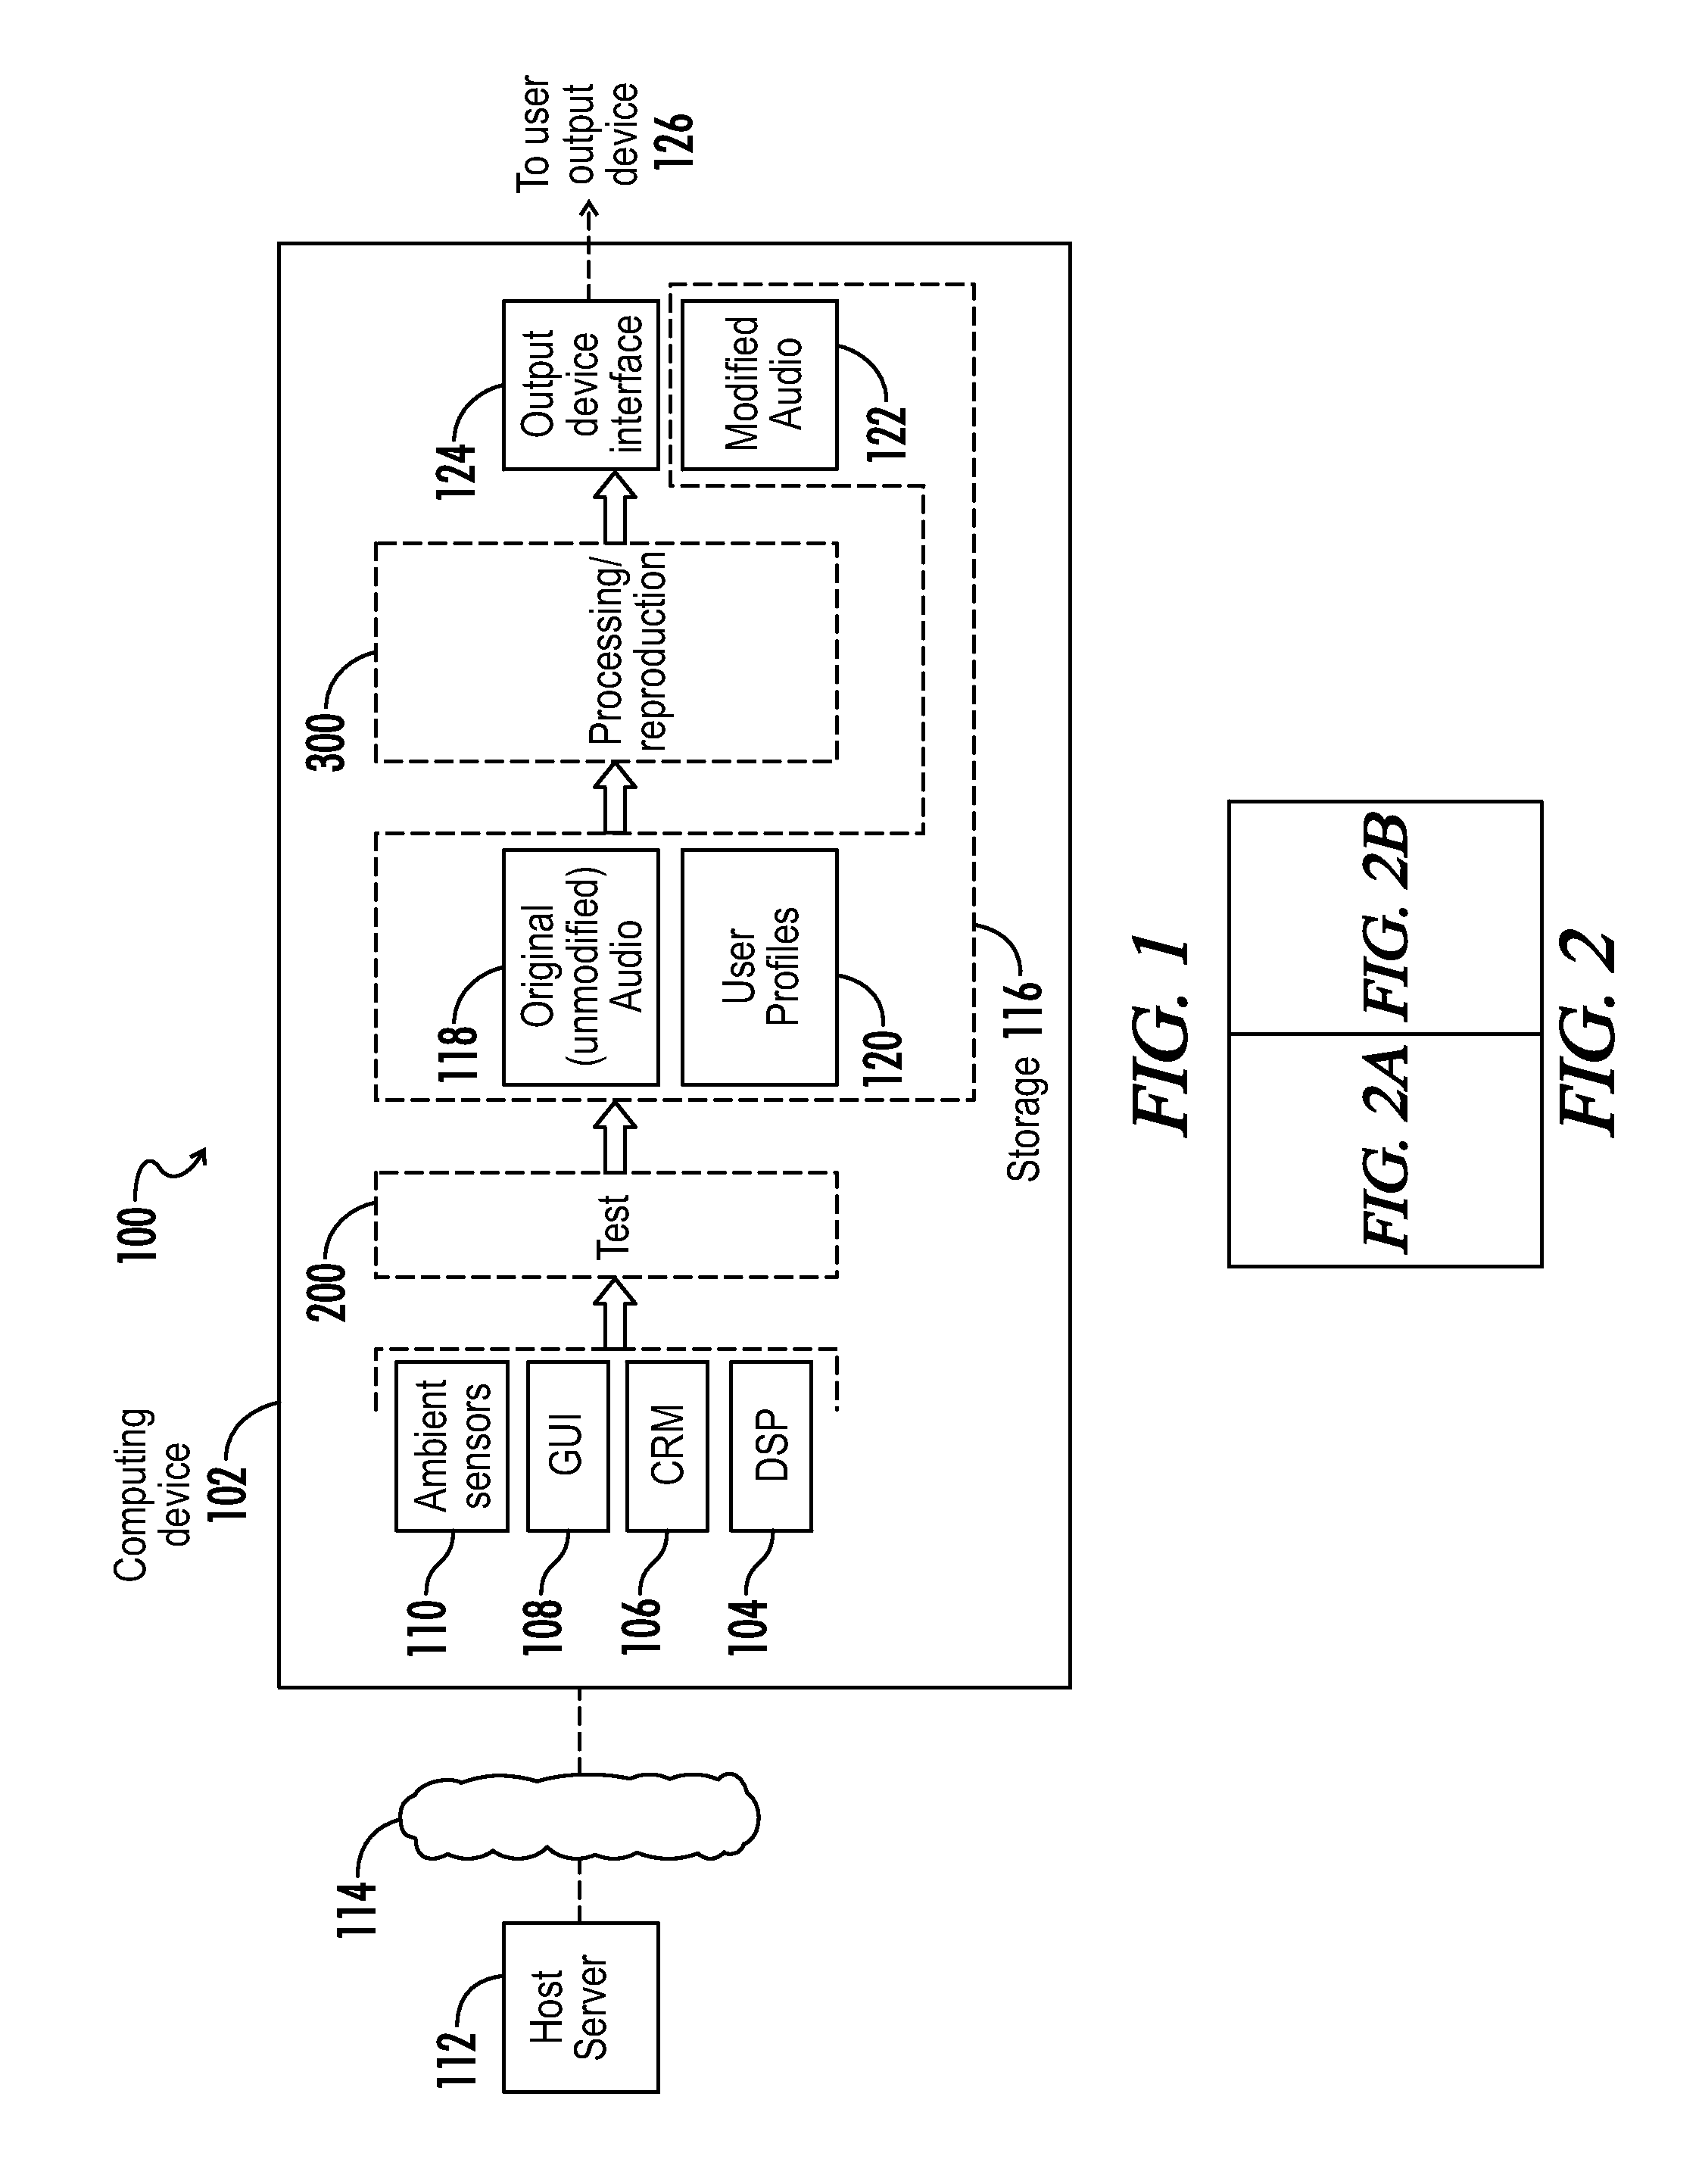 System and method for calibration and reproduction of audio signals based on auditory feedback